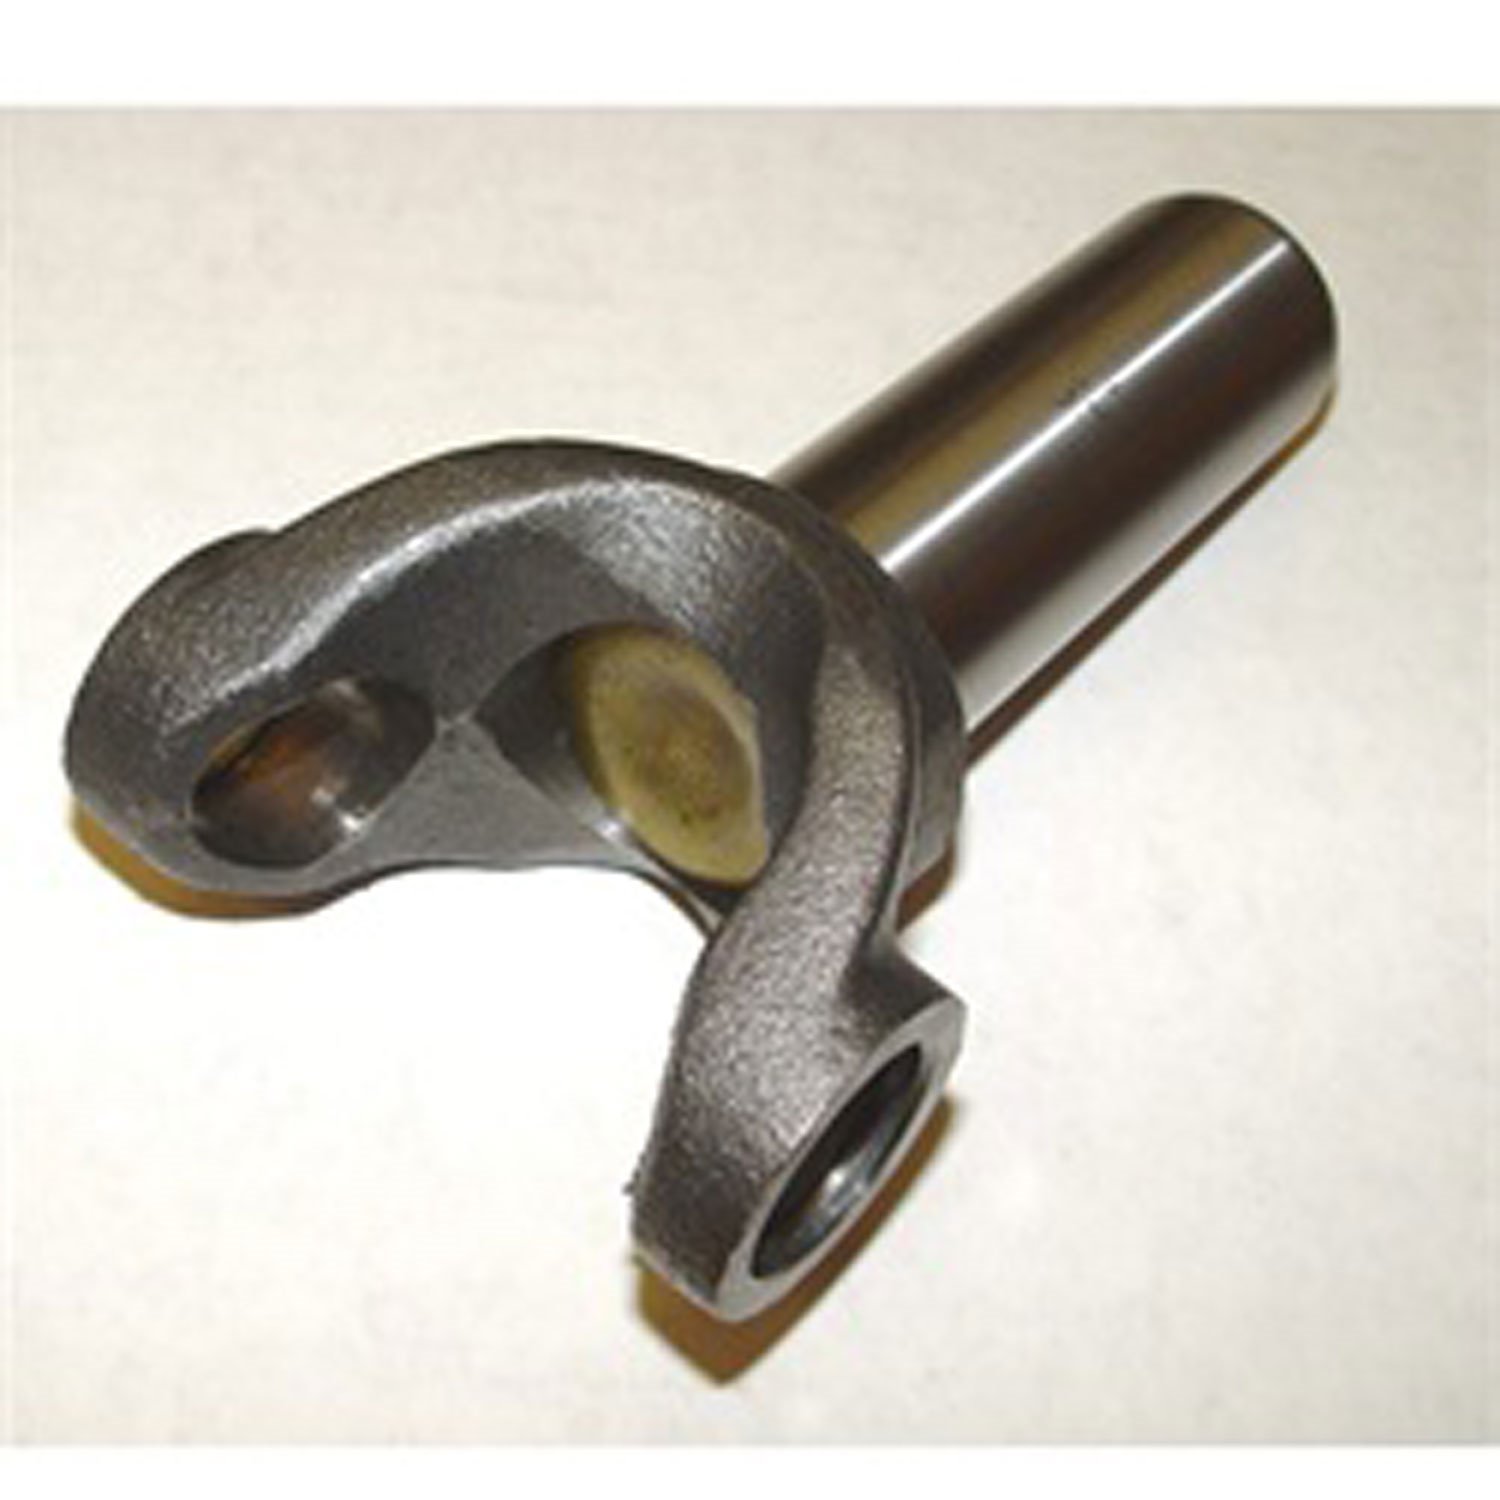 Replacement slip yoke from Omix-ADA, Fits NP231 transfer case found in 87-95 Jeep Wrangler Y